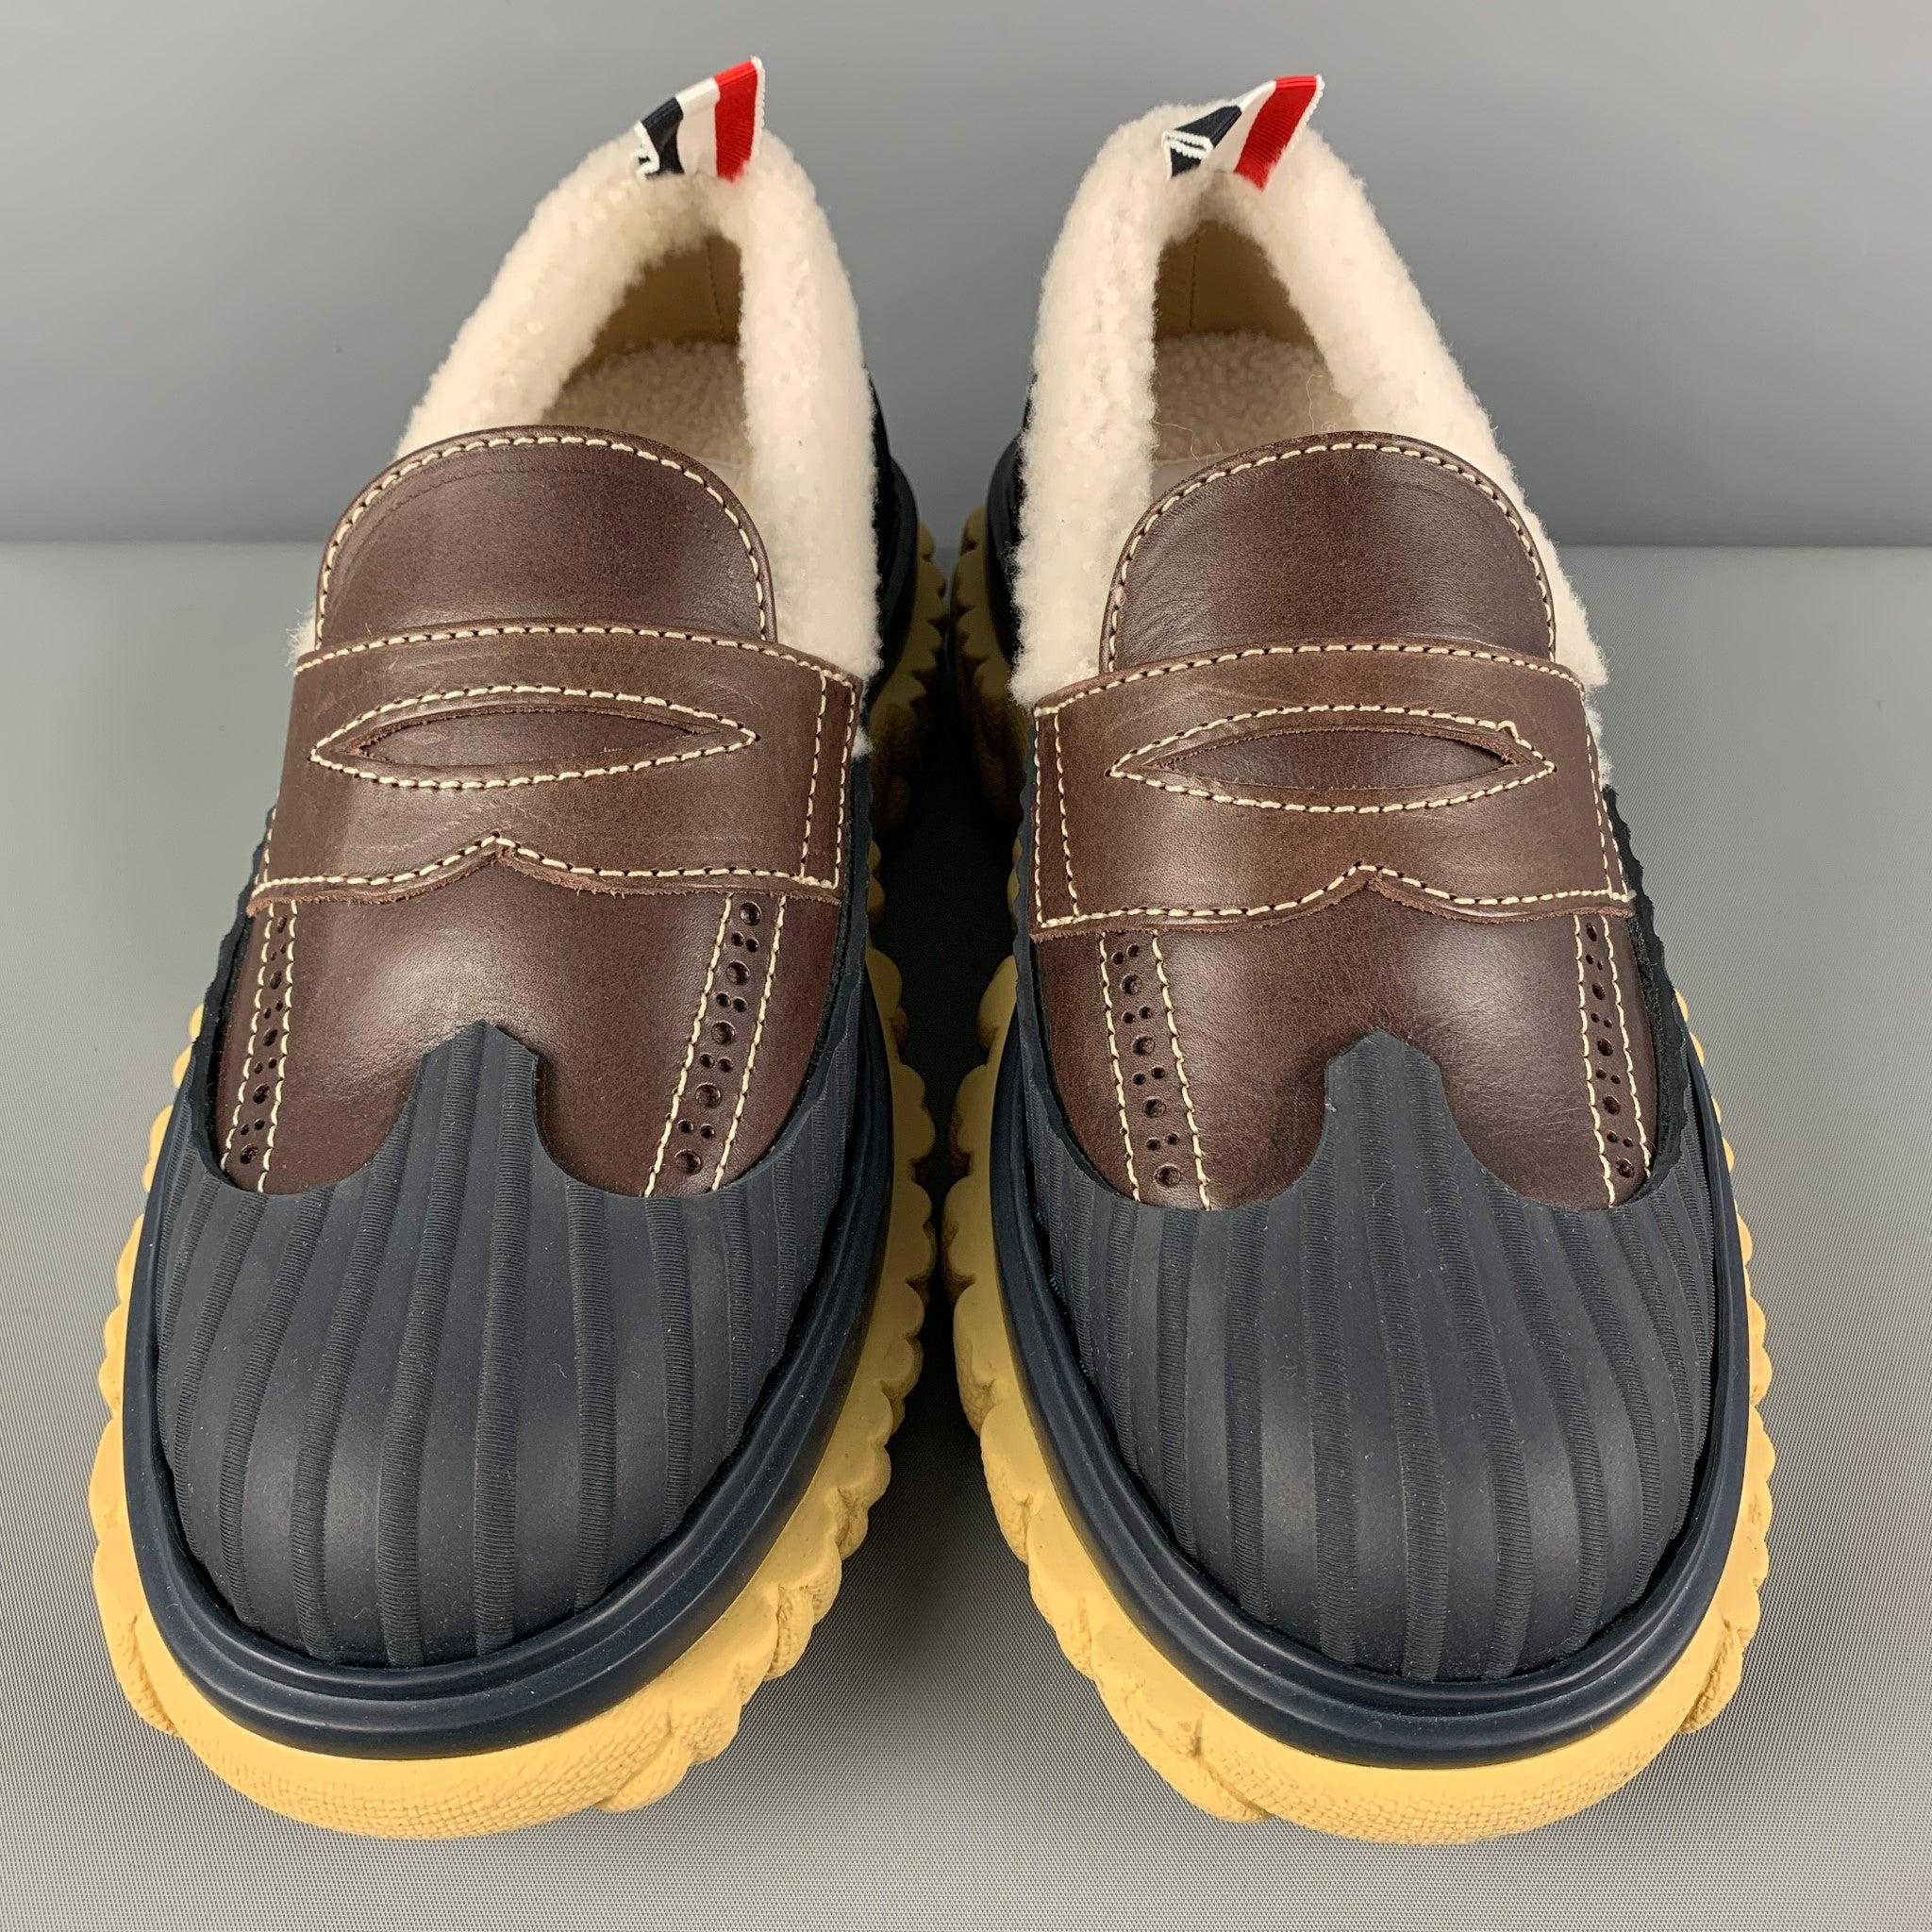 Men's THOM BROWNE Size 7.5 Navy Cream Brown Leather Shearling Loafer Duck Shoe For Sale